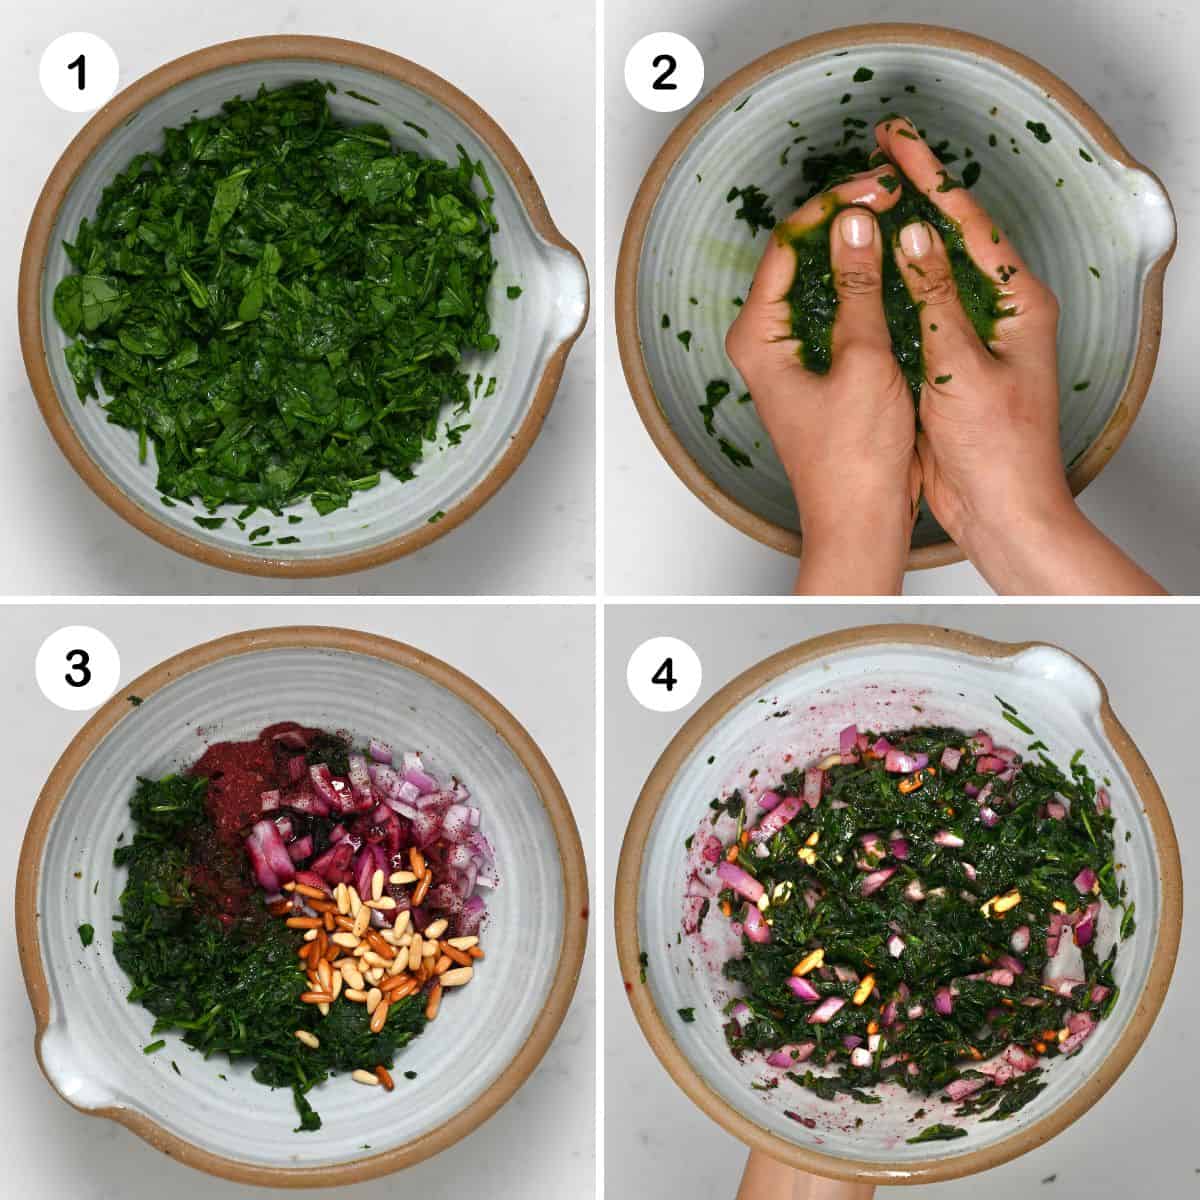 Steps for preparing spinach mixture